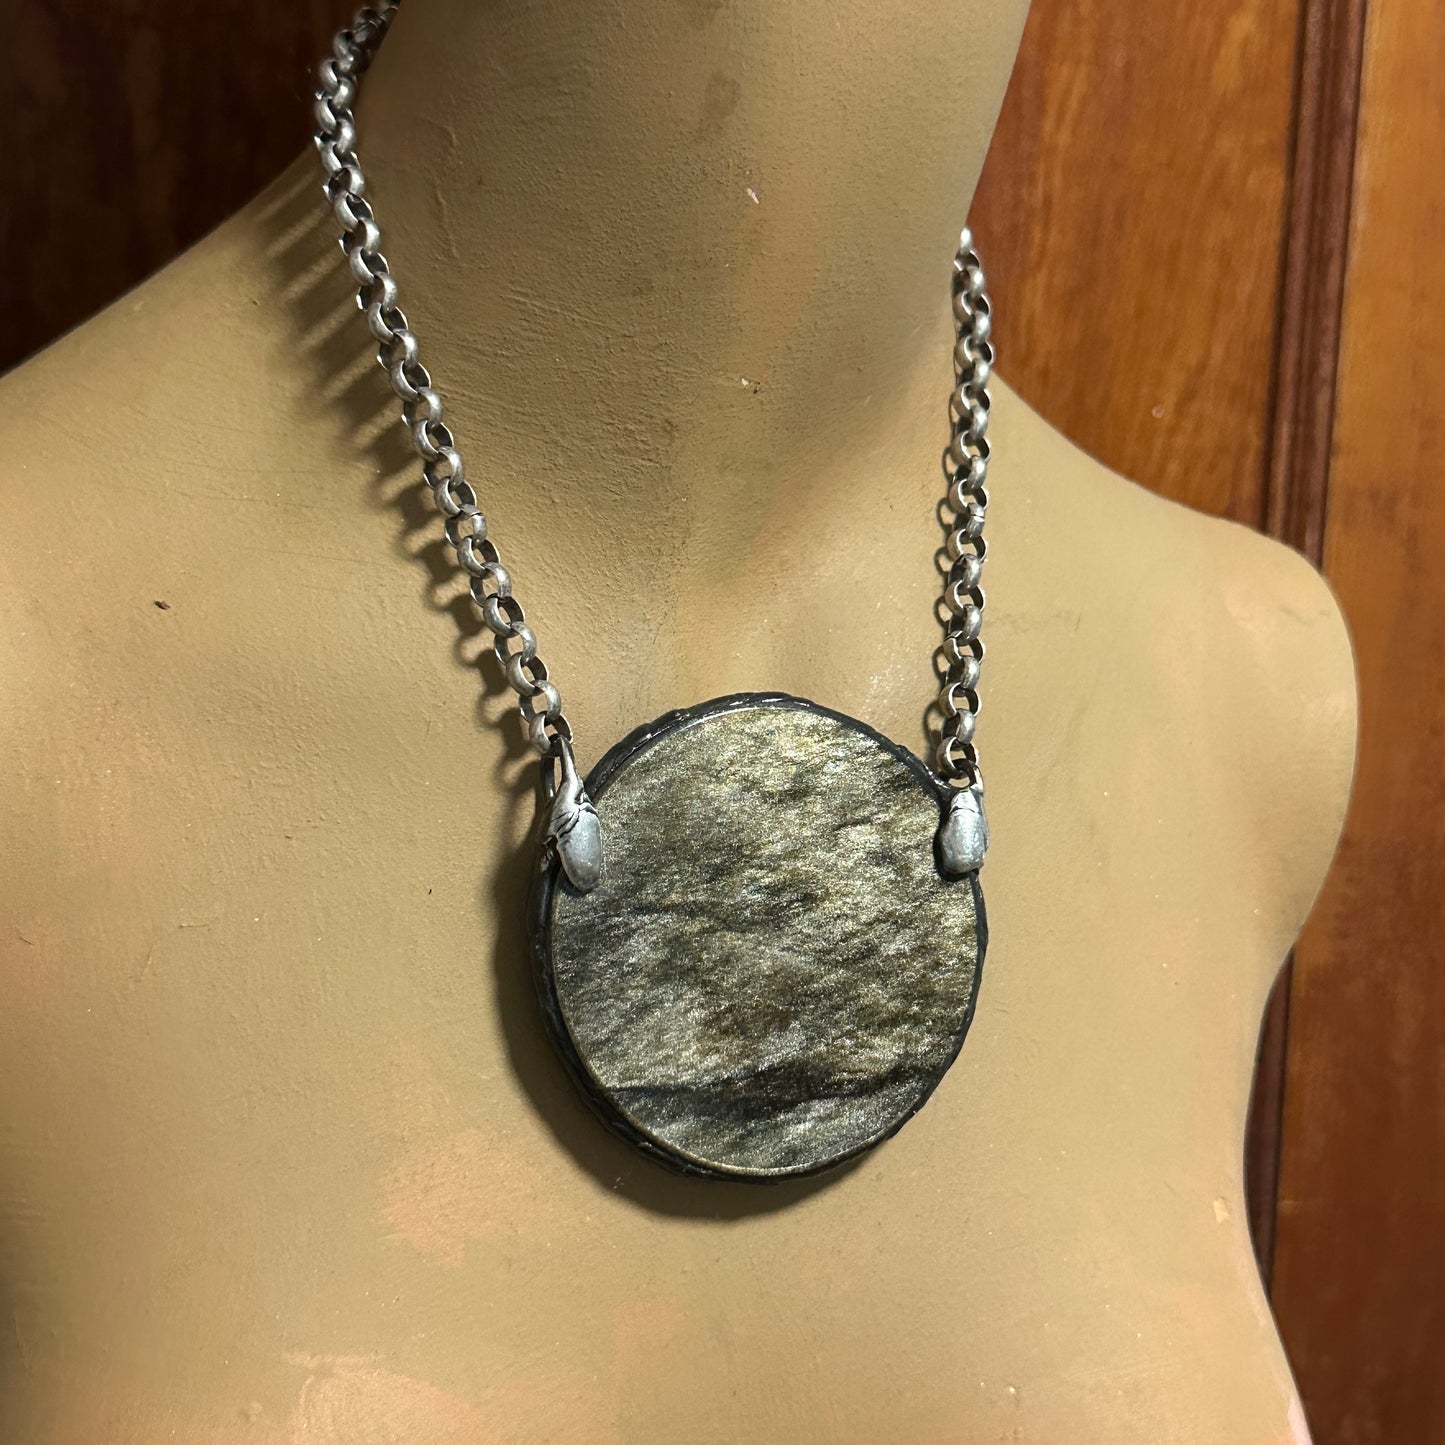 Full Moon ~ Golden Obsidian Nugget Necklace